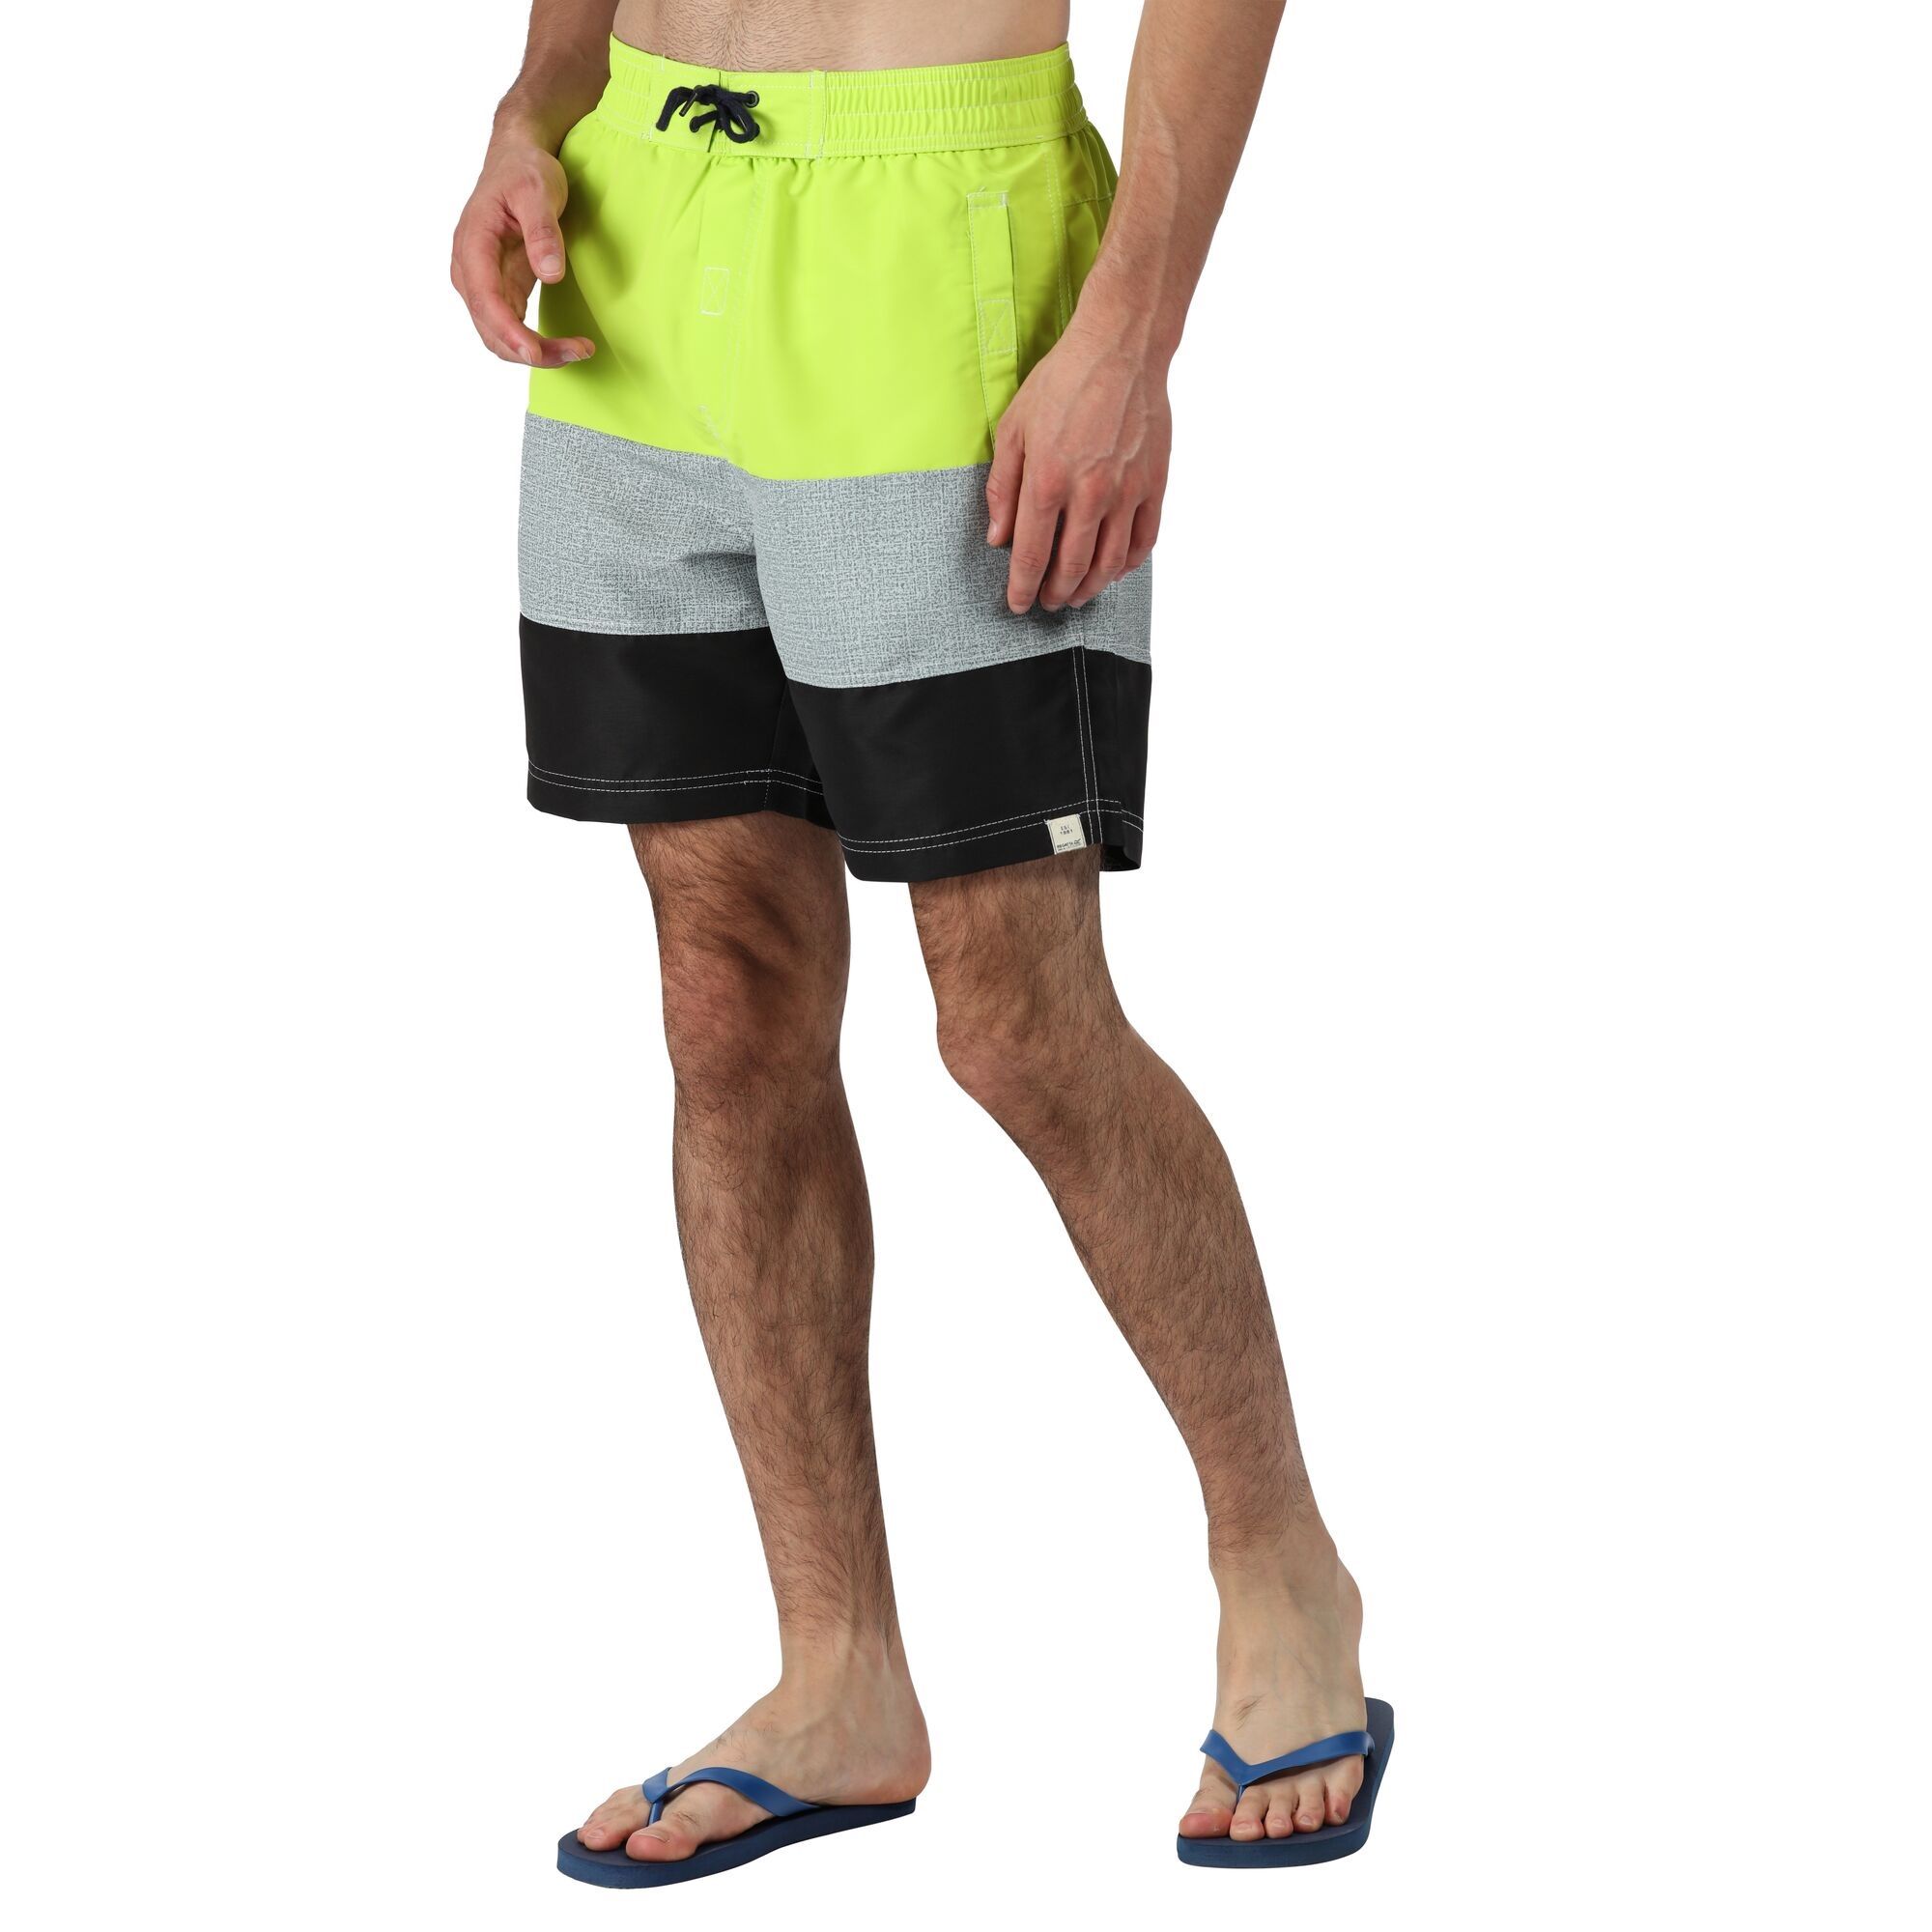 Material: 100% polyester taslan fabric. Quick drying fabric. Adjustable drawcord waist. 2 side pockets. 1 back pocket. Mesh brief liner with security pocket.